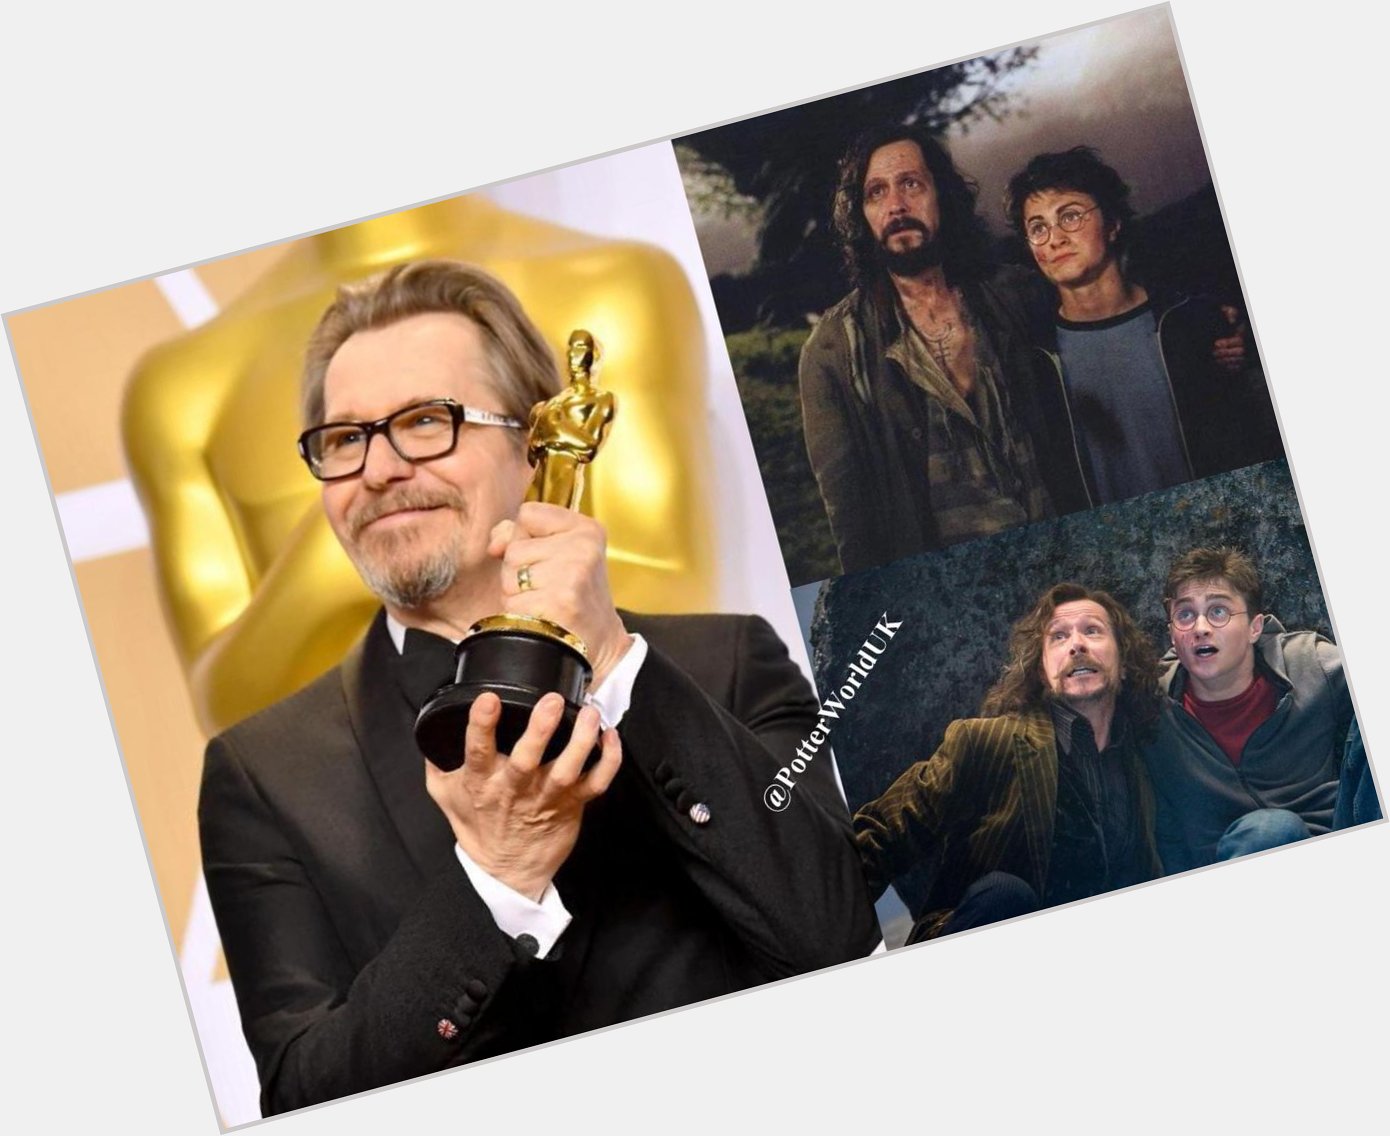 Happy 61st Birthday to Gary Oldman! He portrayed Sirius Black in the Harry Potter films. 